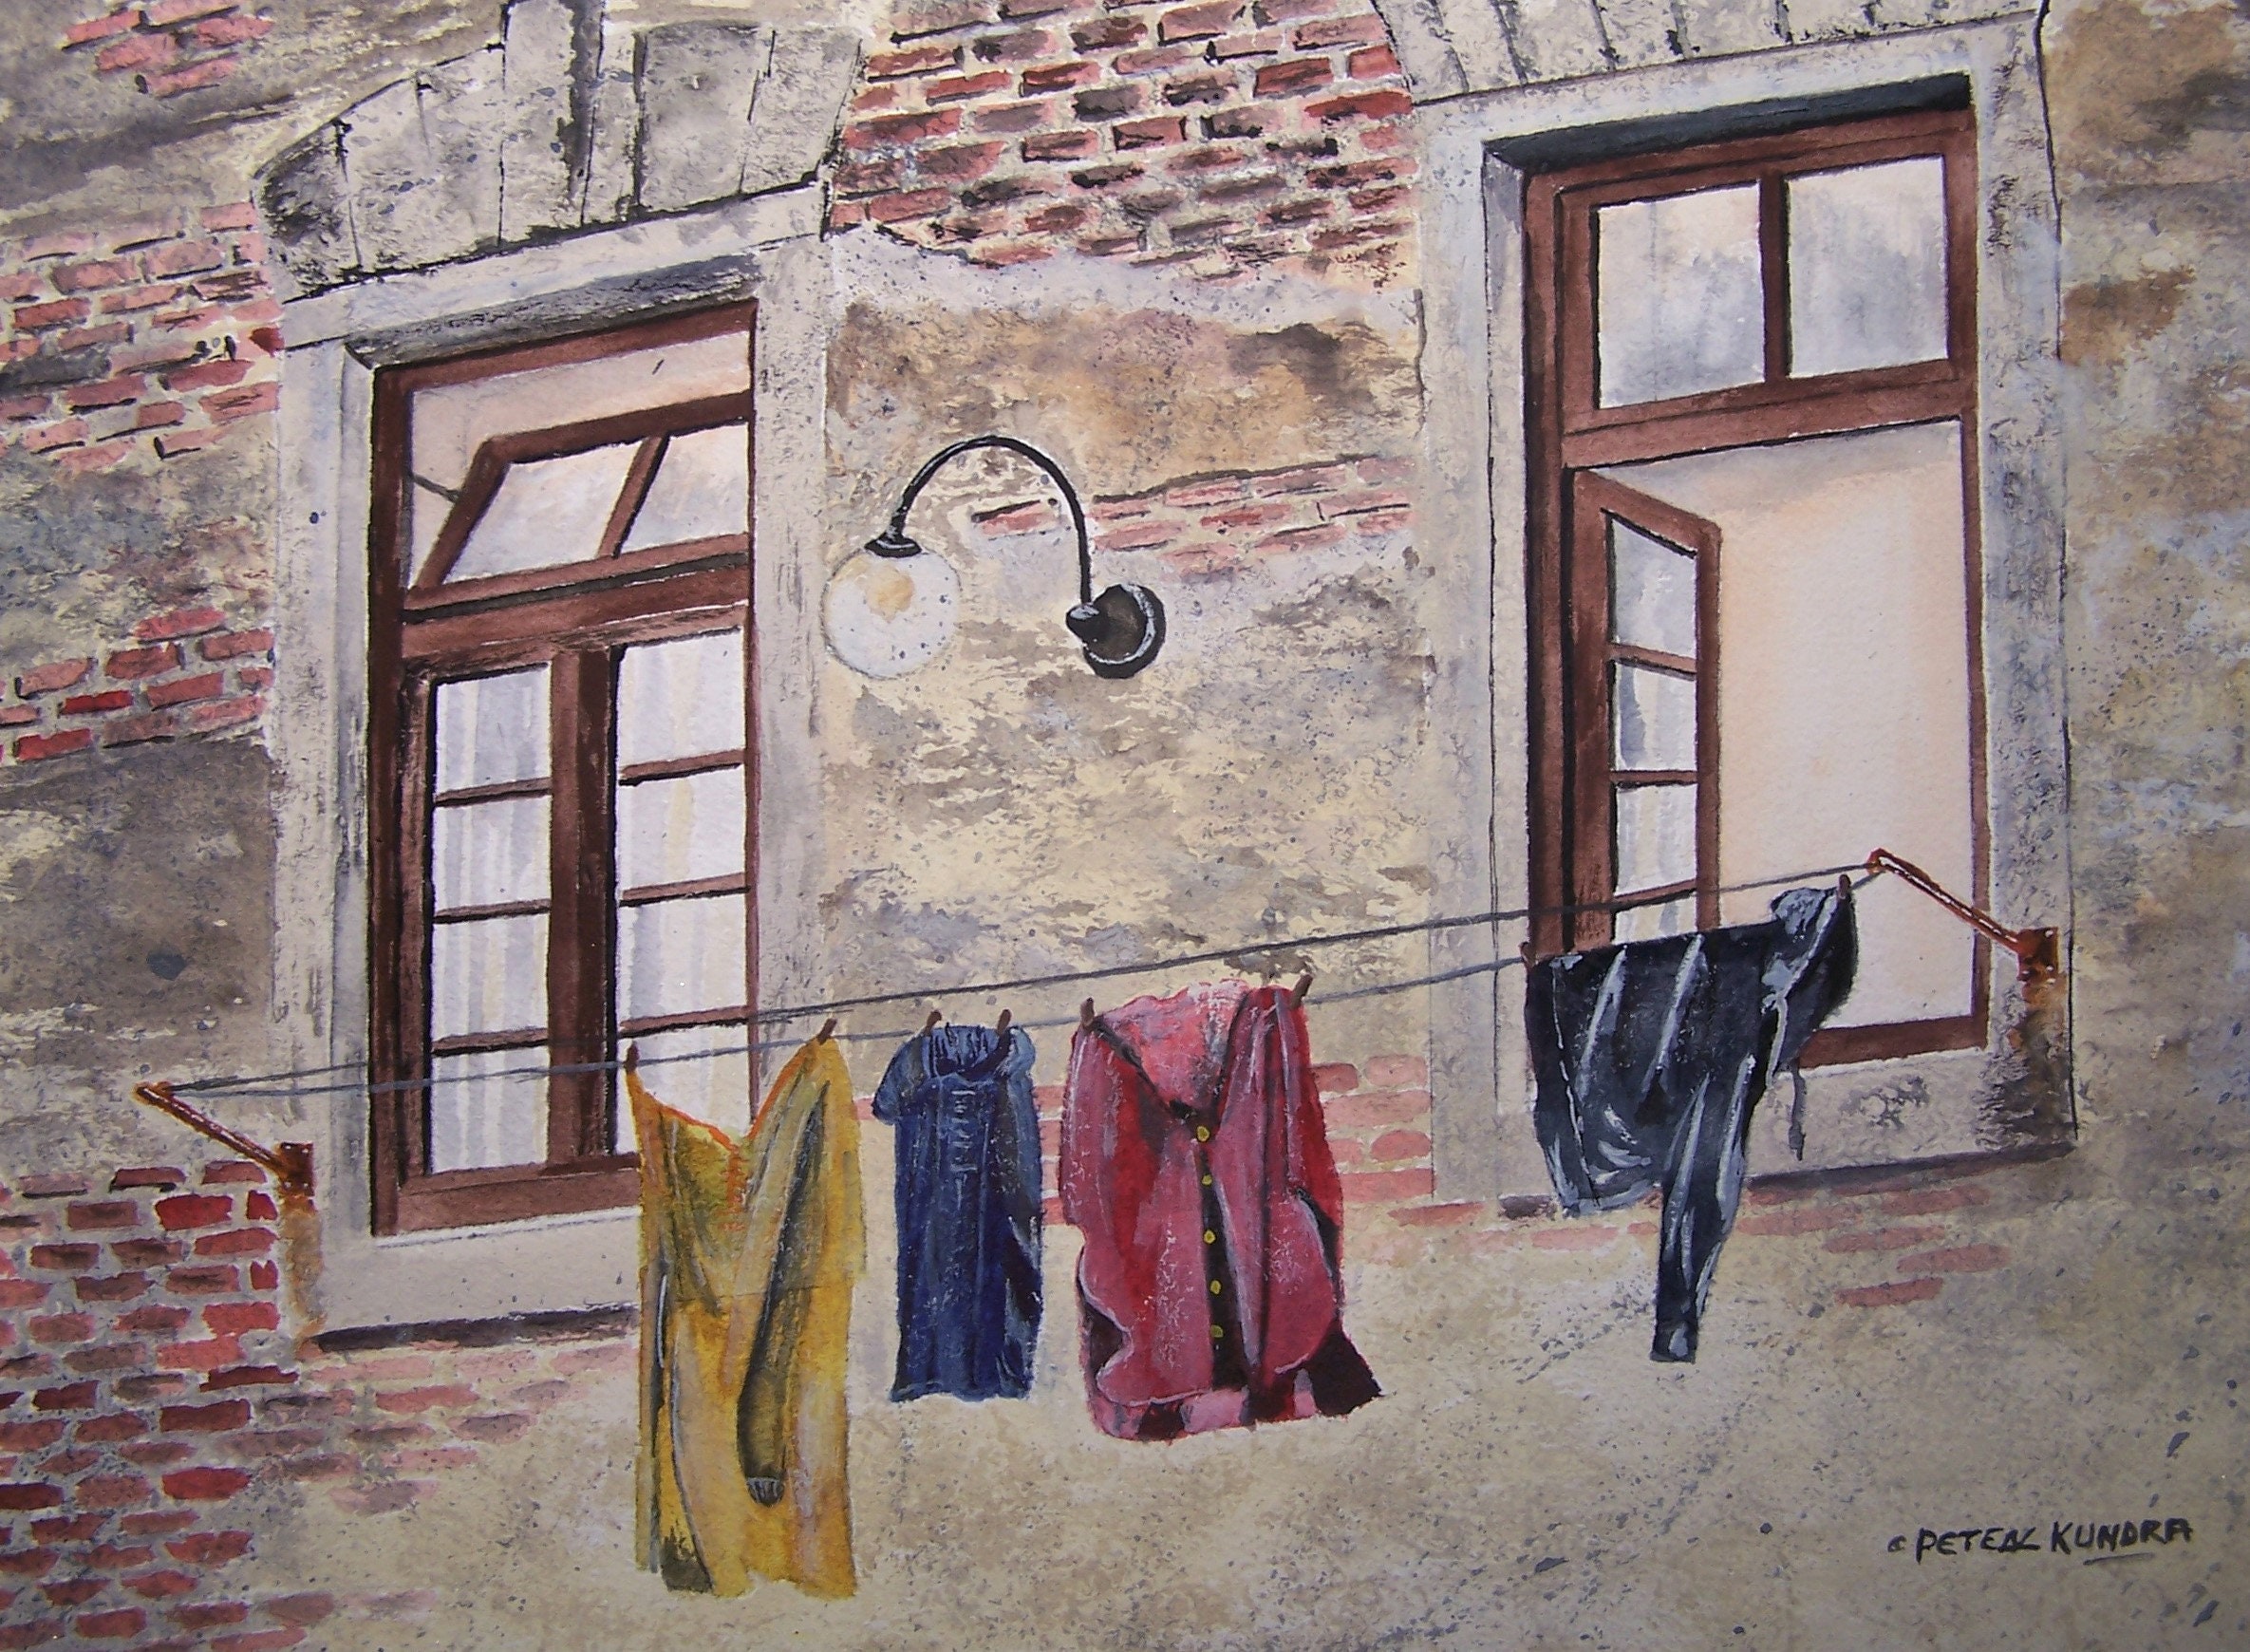 Painting of Hanging Laundrywash Dayscenic Laundry picture